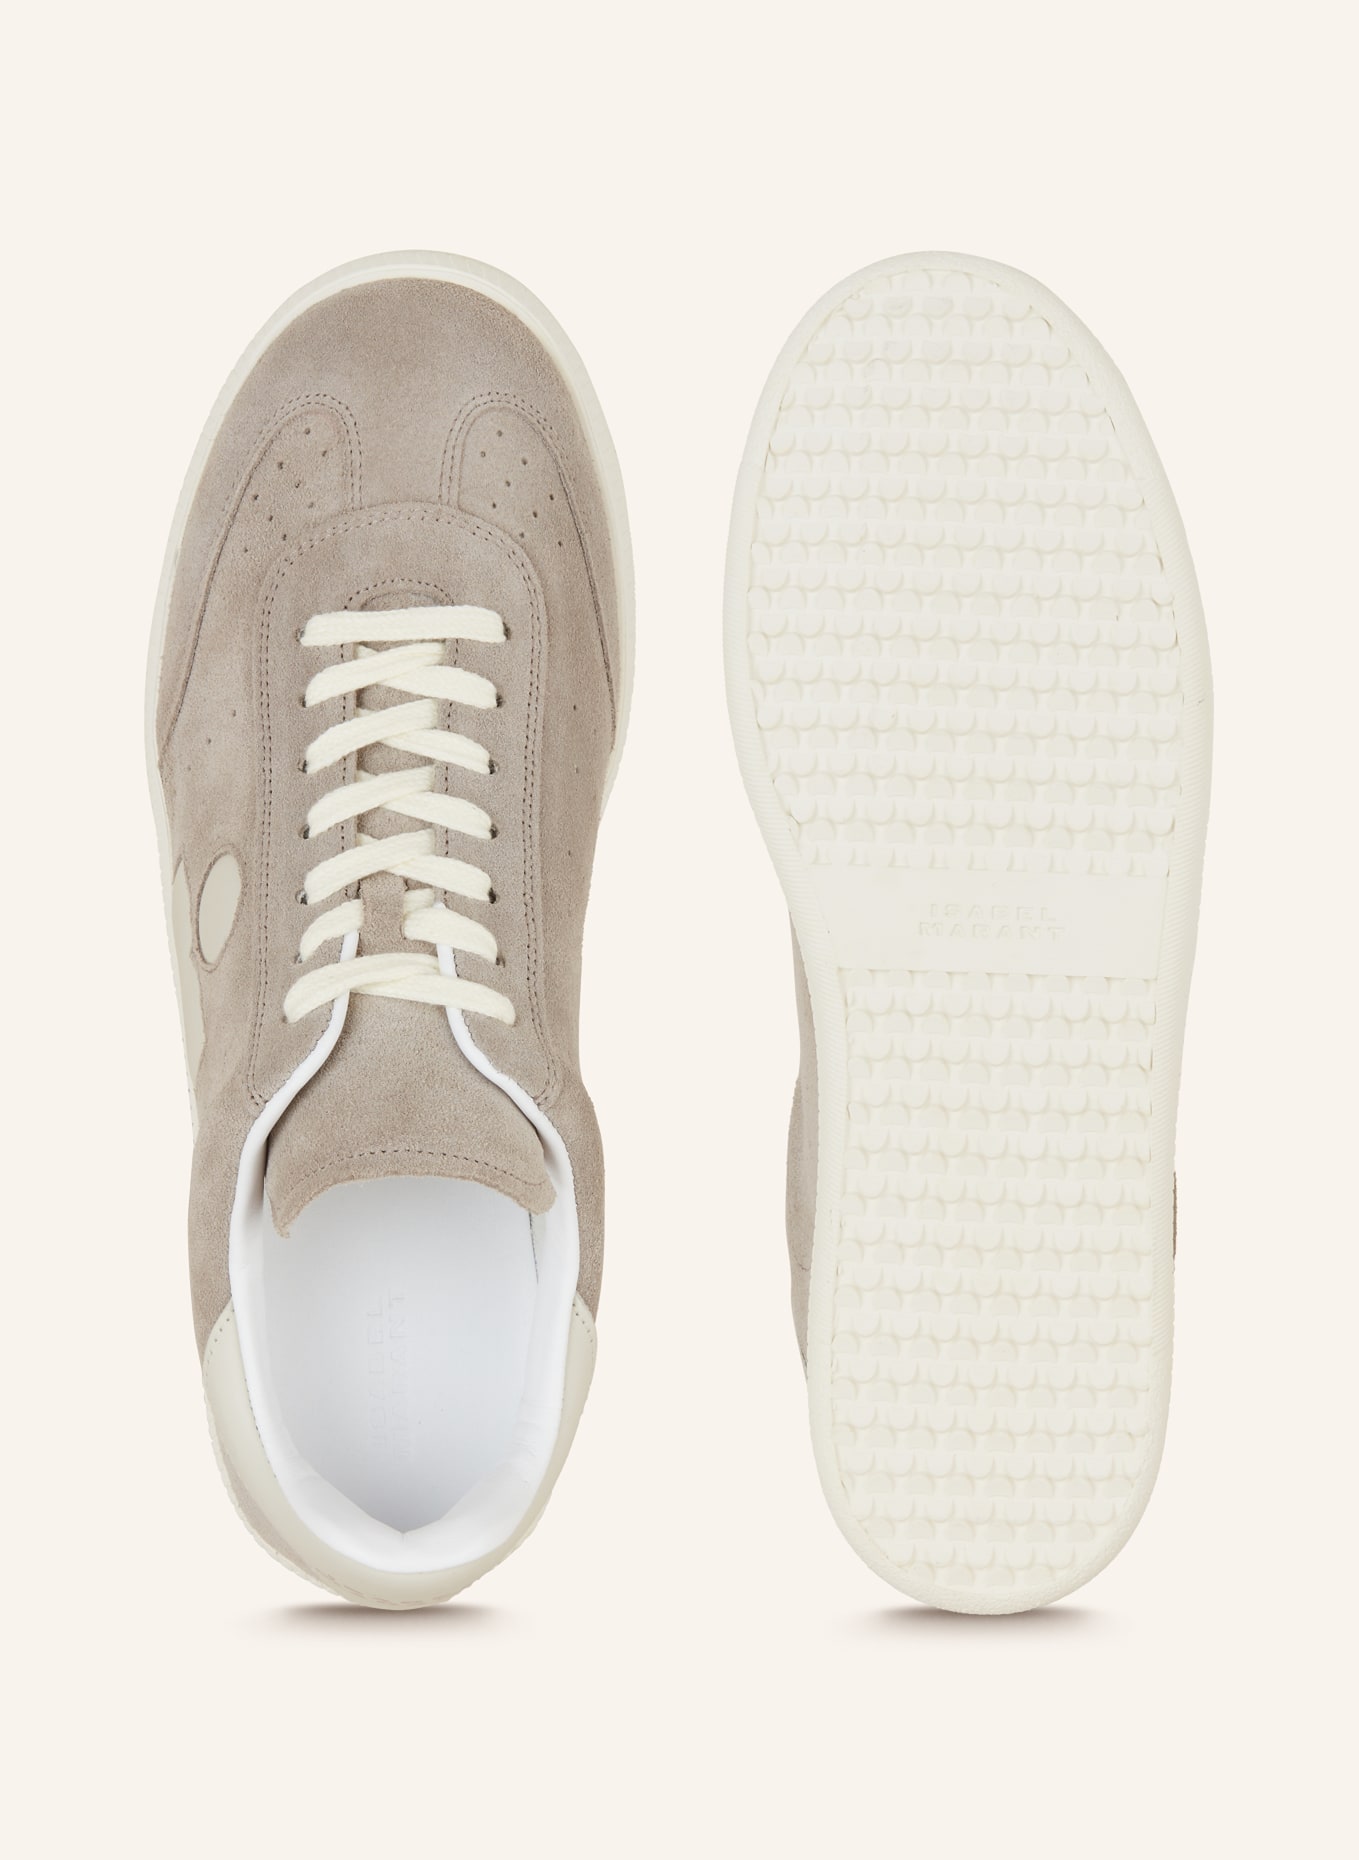 ISABEL MARANT Sneaker BRYCE, Farbe: TAUPE (Bild 5)